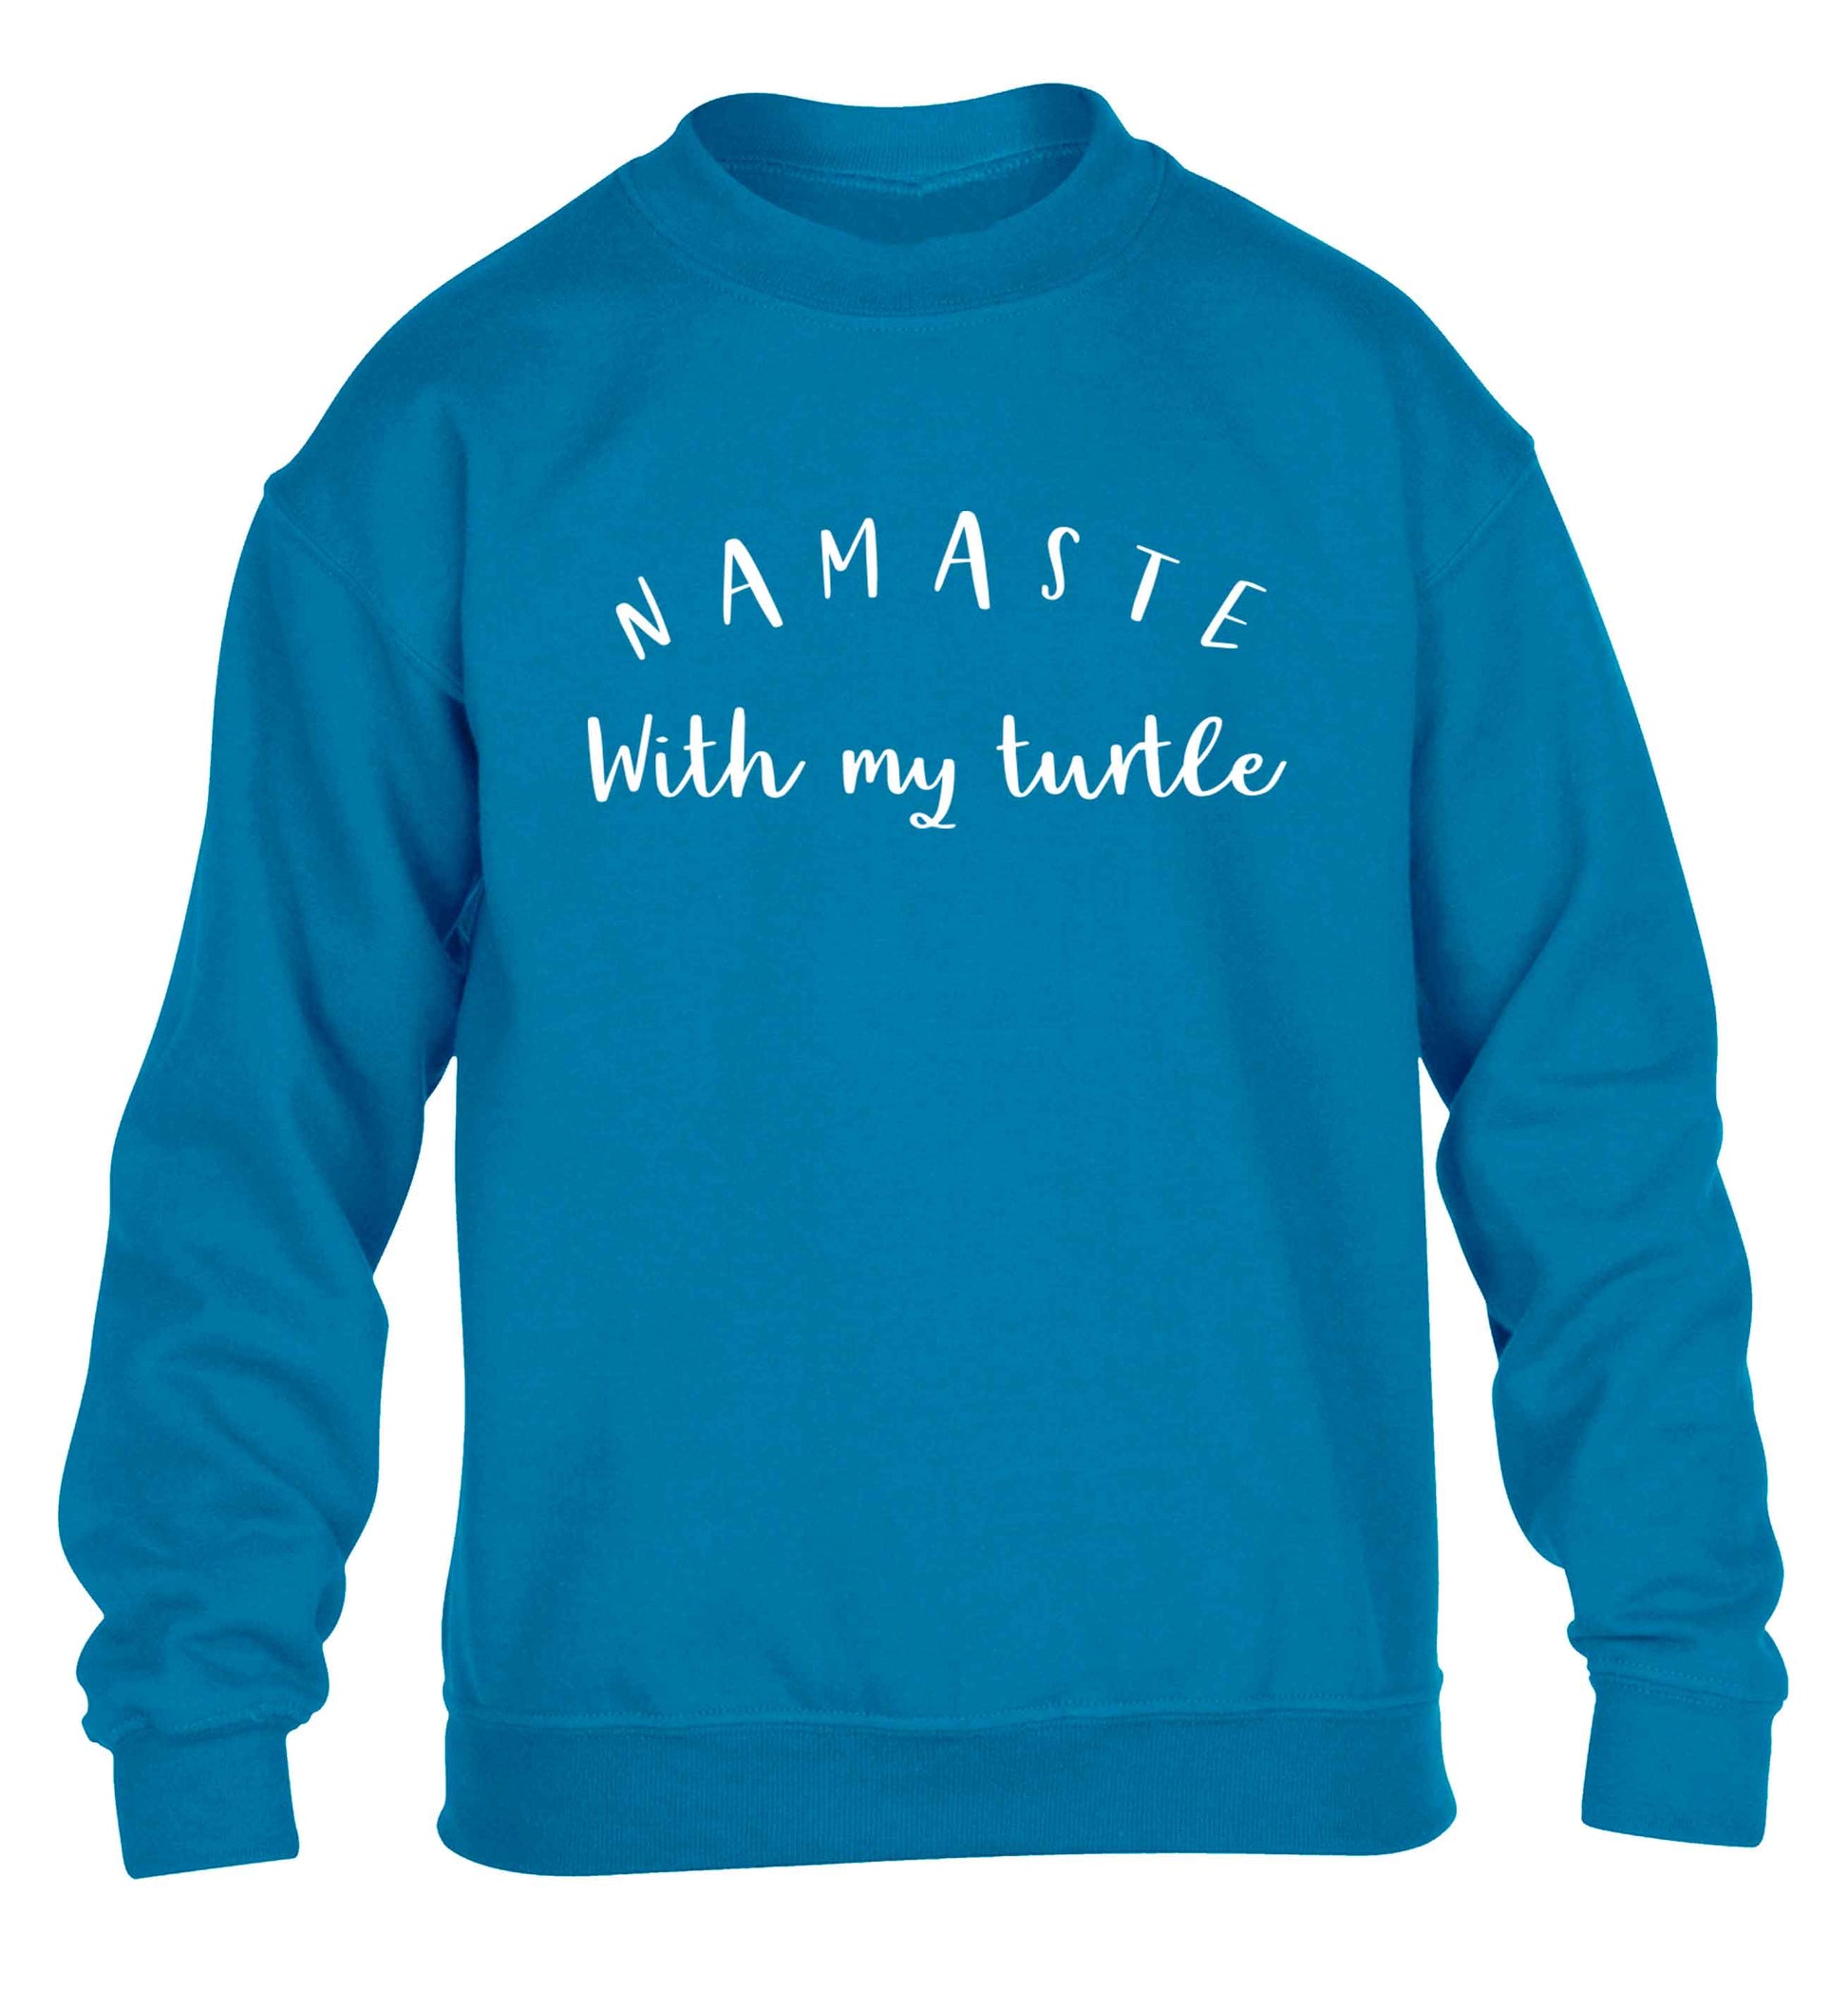 Namaste with my turtle children's blue sweater 12-13 Years